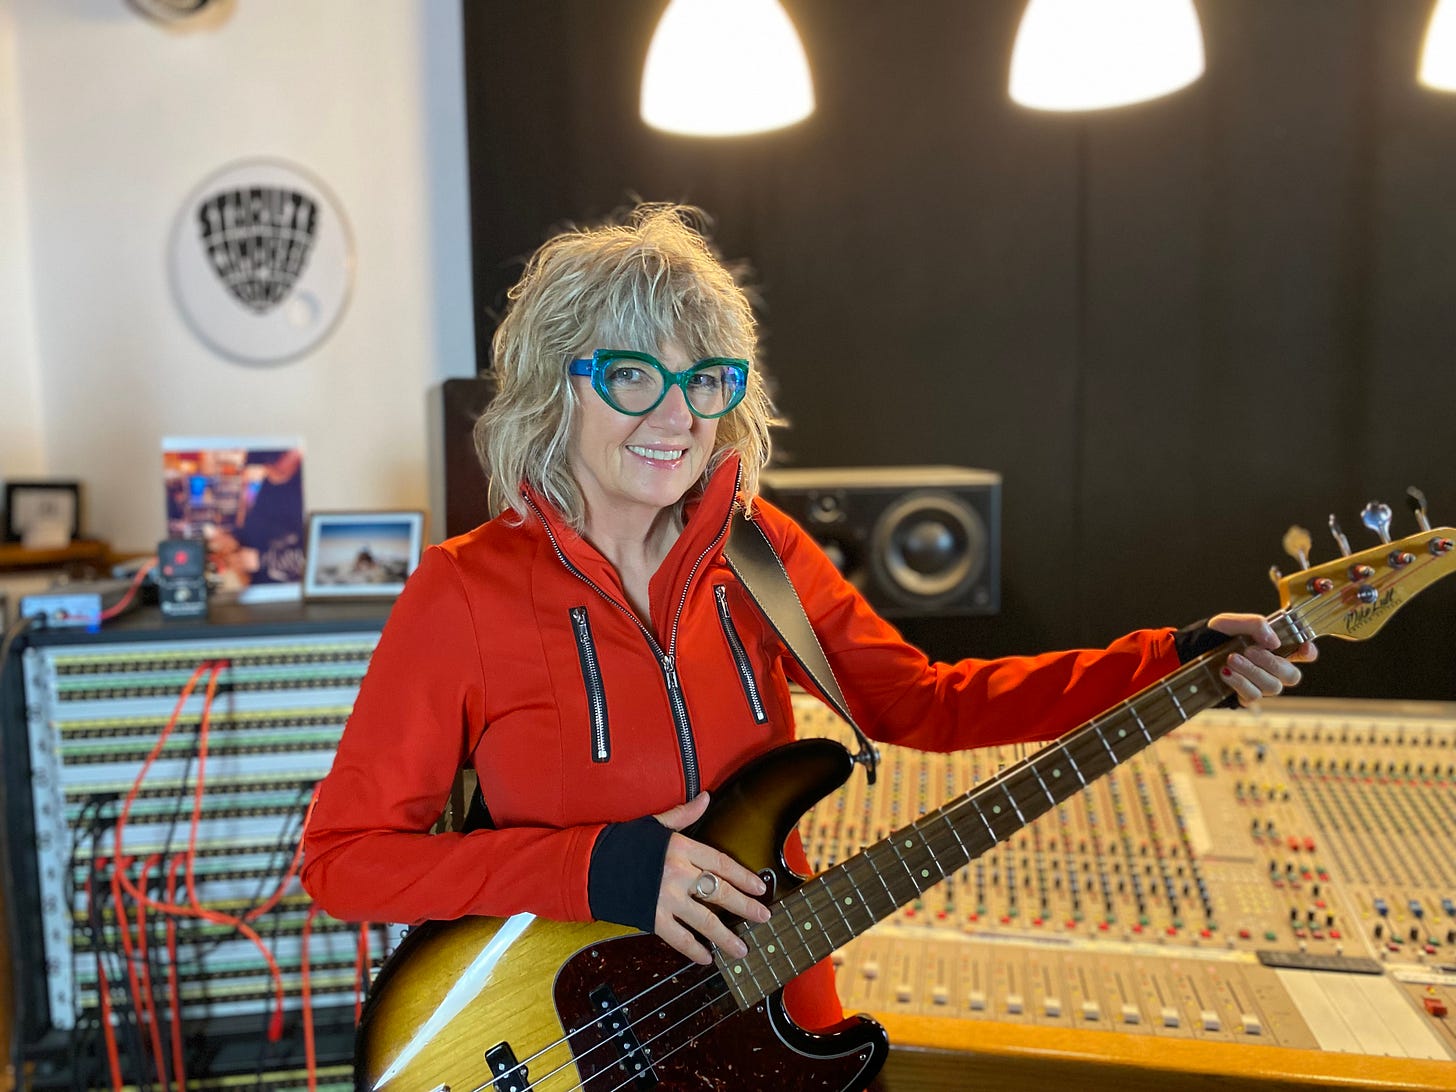 Bassist Suzy Starlite with her Mike Lull M4V bass in the Supertone Studio, Portugal. 